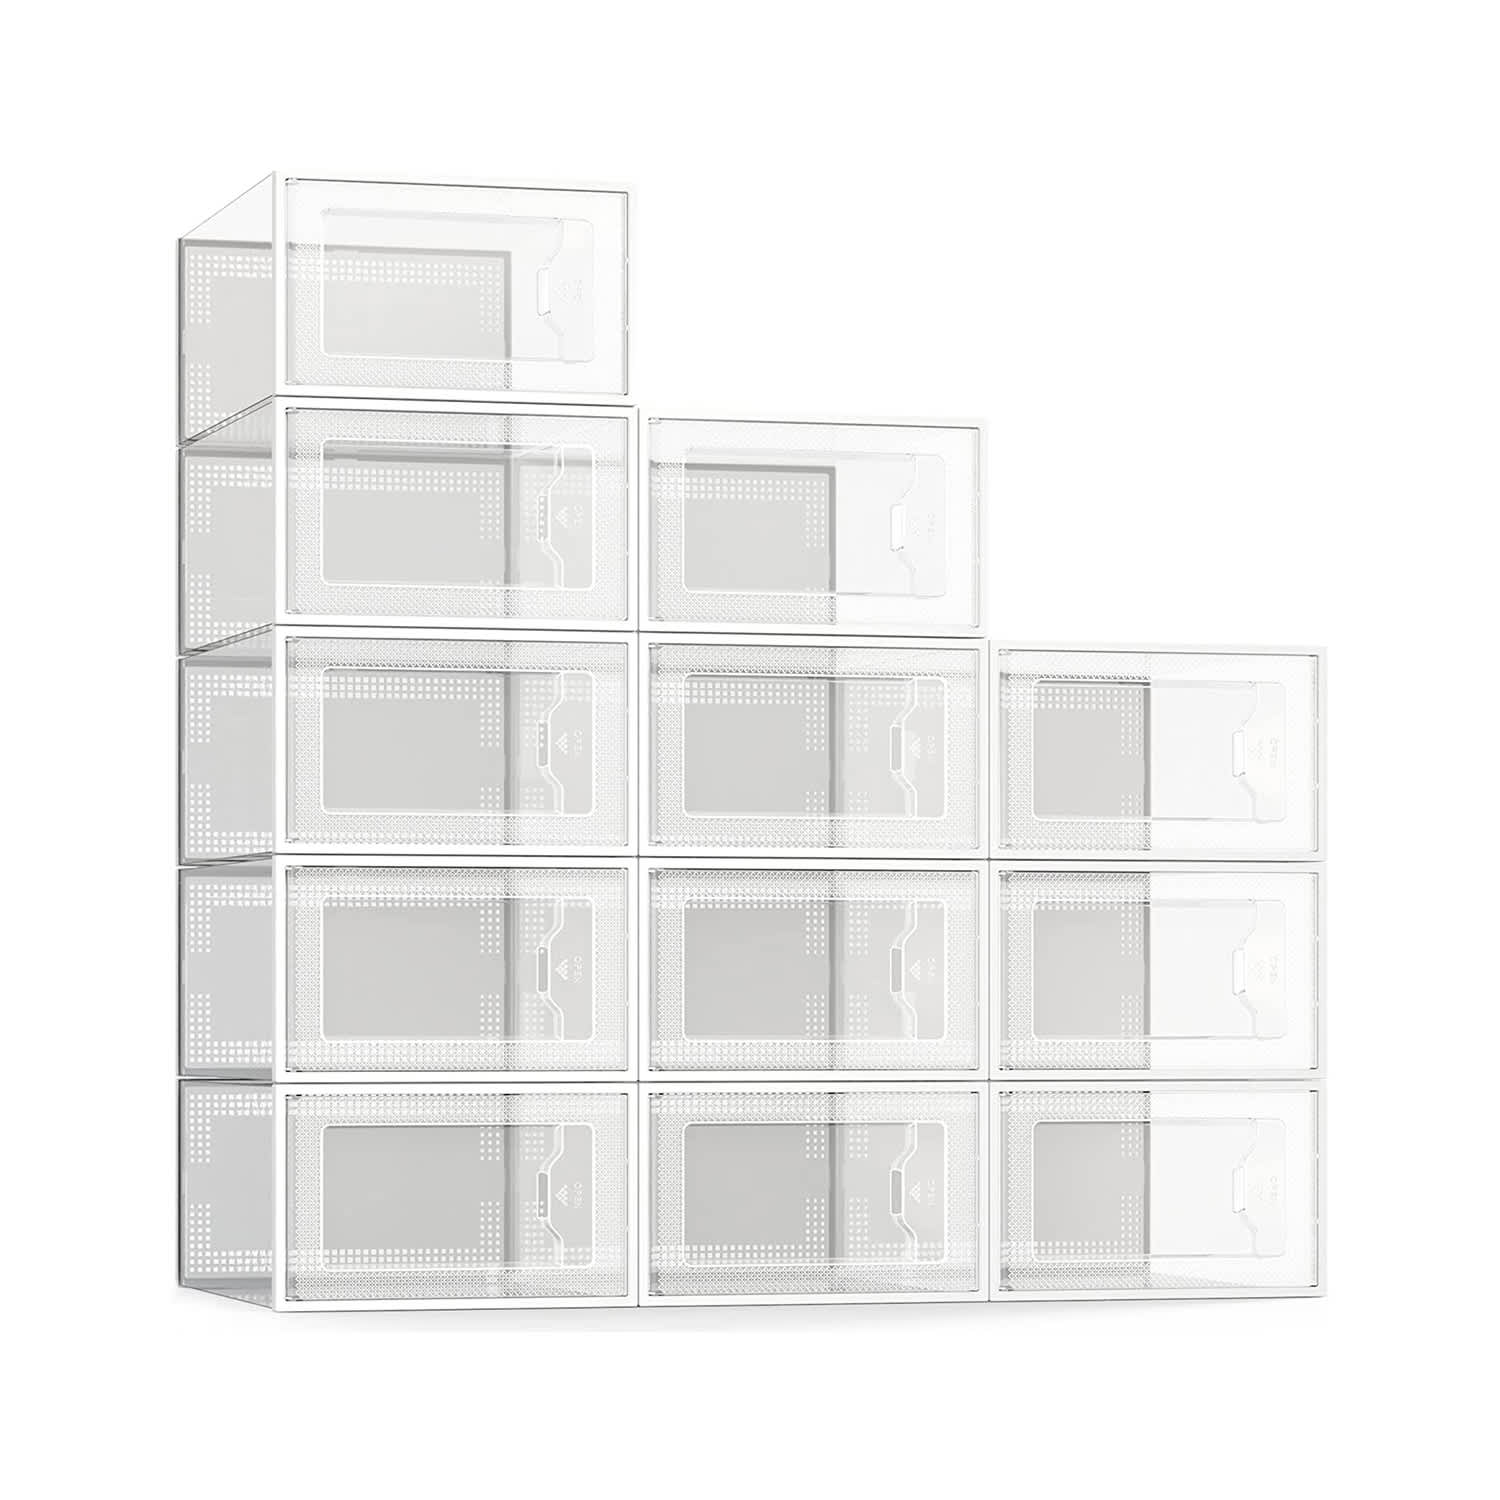 SEE SPRING X-Large 12 Pack Shoe Storage Box, Clear Plastic